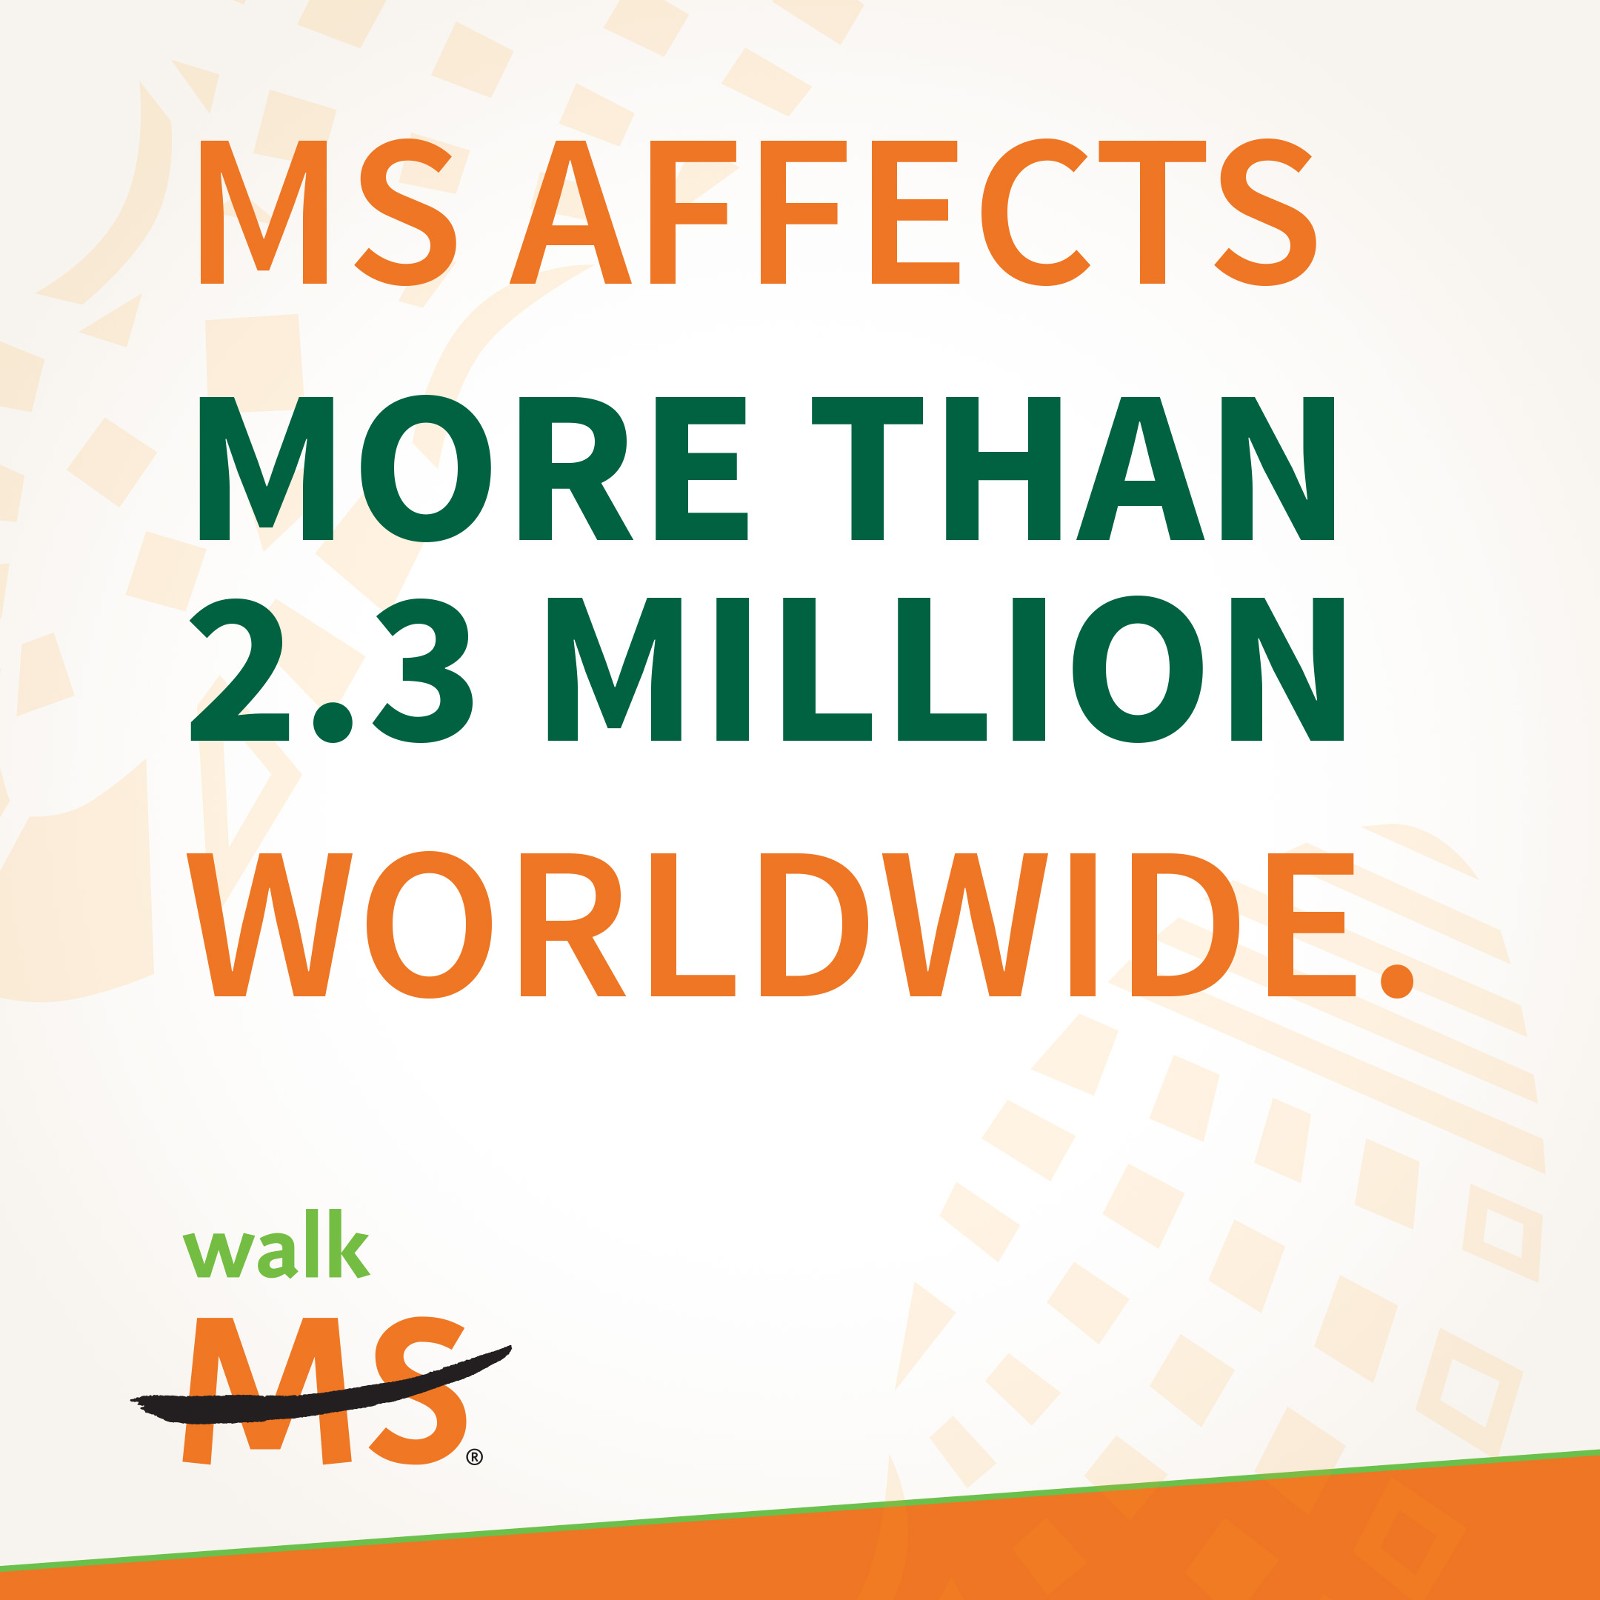 MS affects more than 2.3 million worldwide